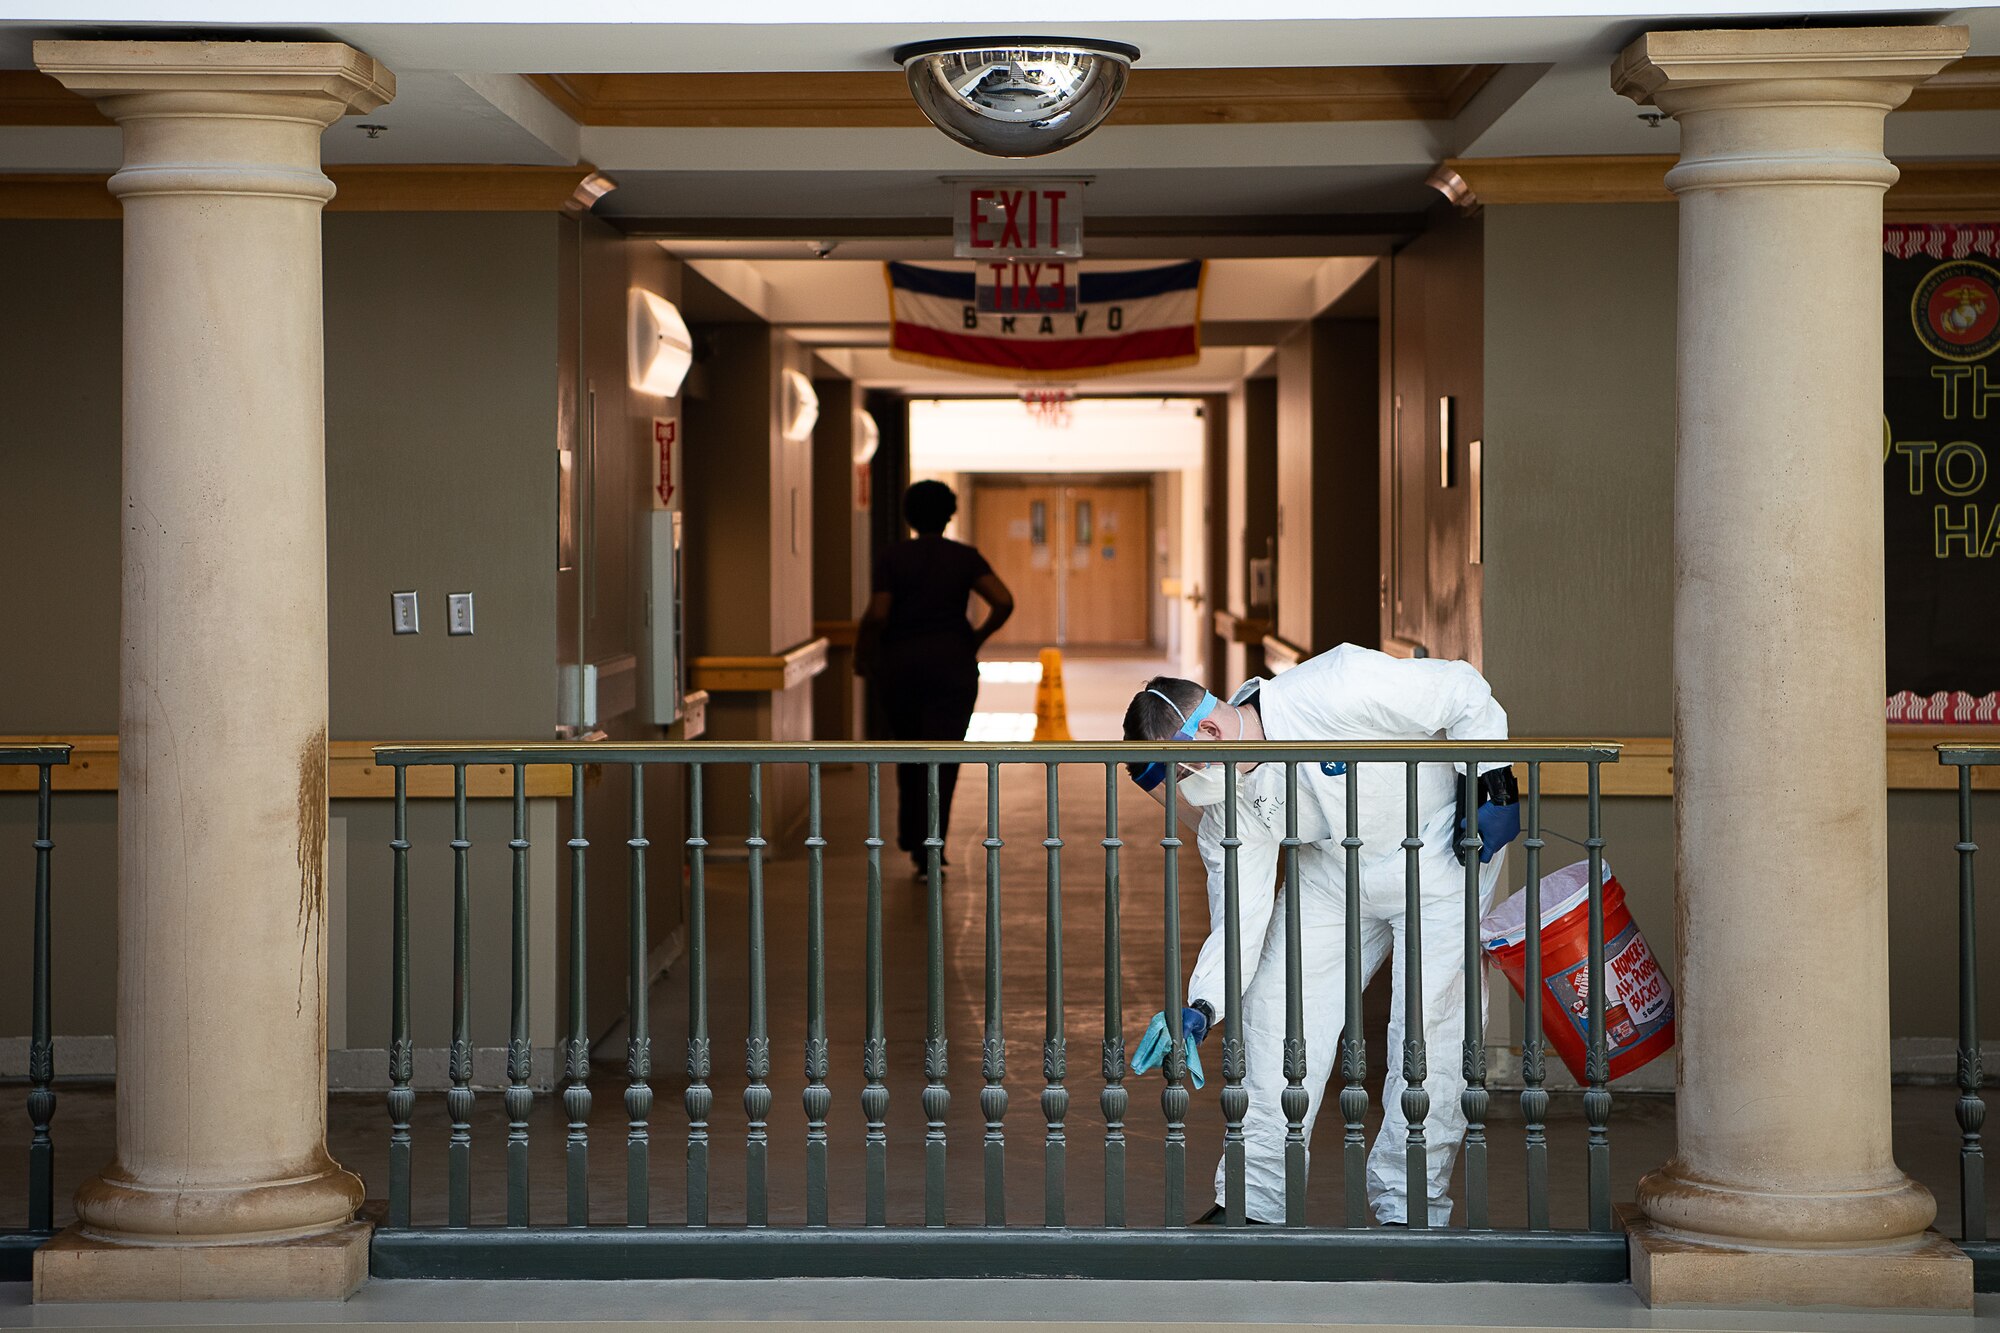 An Oklahoma Army National Guardsman uses Centers for Disease Control and Prevention-approved methods to disinfect the railing around an open stairwell of the Norman Veterans Center in Norman, Oklahoma, April 29, 2020. Guardsmen were at the Center to disinfect commonly touched surfaces and high traffic areas including handrails, chair arms, tables, switches and elevator buttons, split up into three teams, in order to more efficiently covering all of the common areas of the 275,000 square-foot facility. Using pressure sprayers and hand sprayers, the teams worked from the back of the facility to the front. The residents’ military service spans from World War II to Operation Desert Storm. (U.S. Air National Guard photo by Tech. Sgt. Kasey M. Phipps)